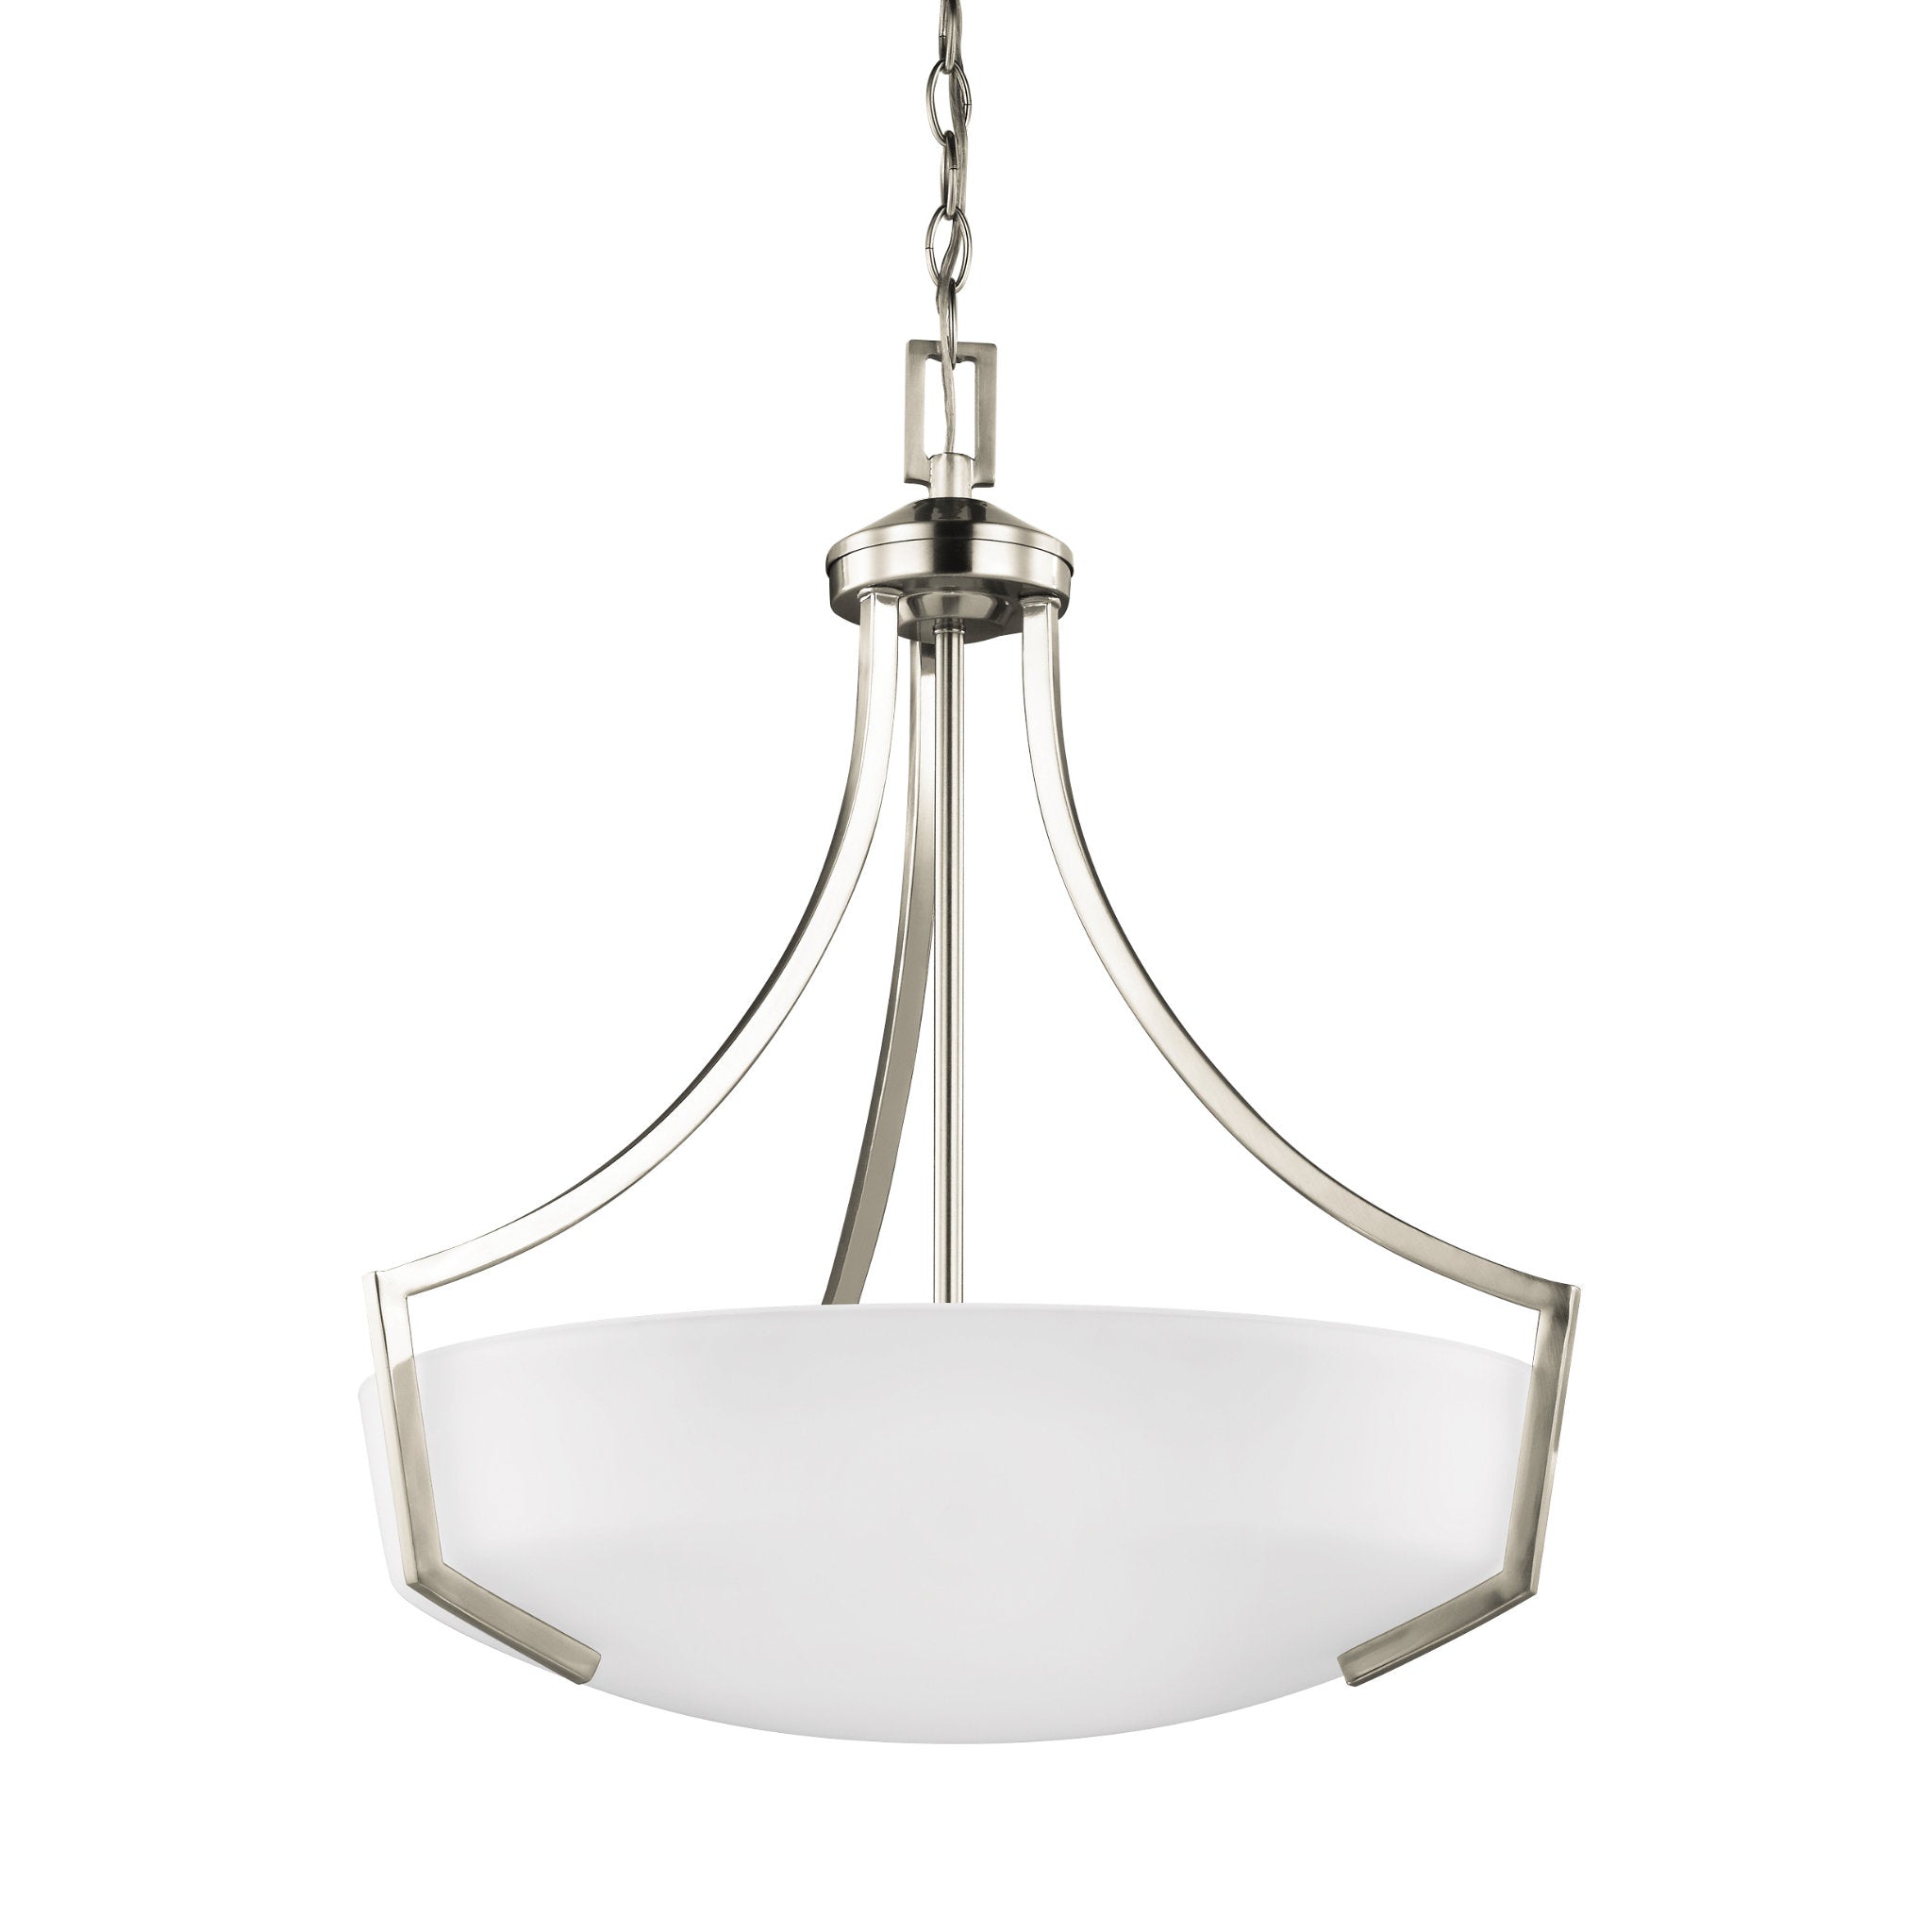 Hanford Three Light Pendant Transitional 22.625" Height Steel Round Satin Etched Shade in Brushed Nickel